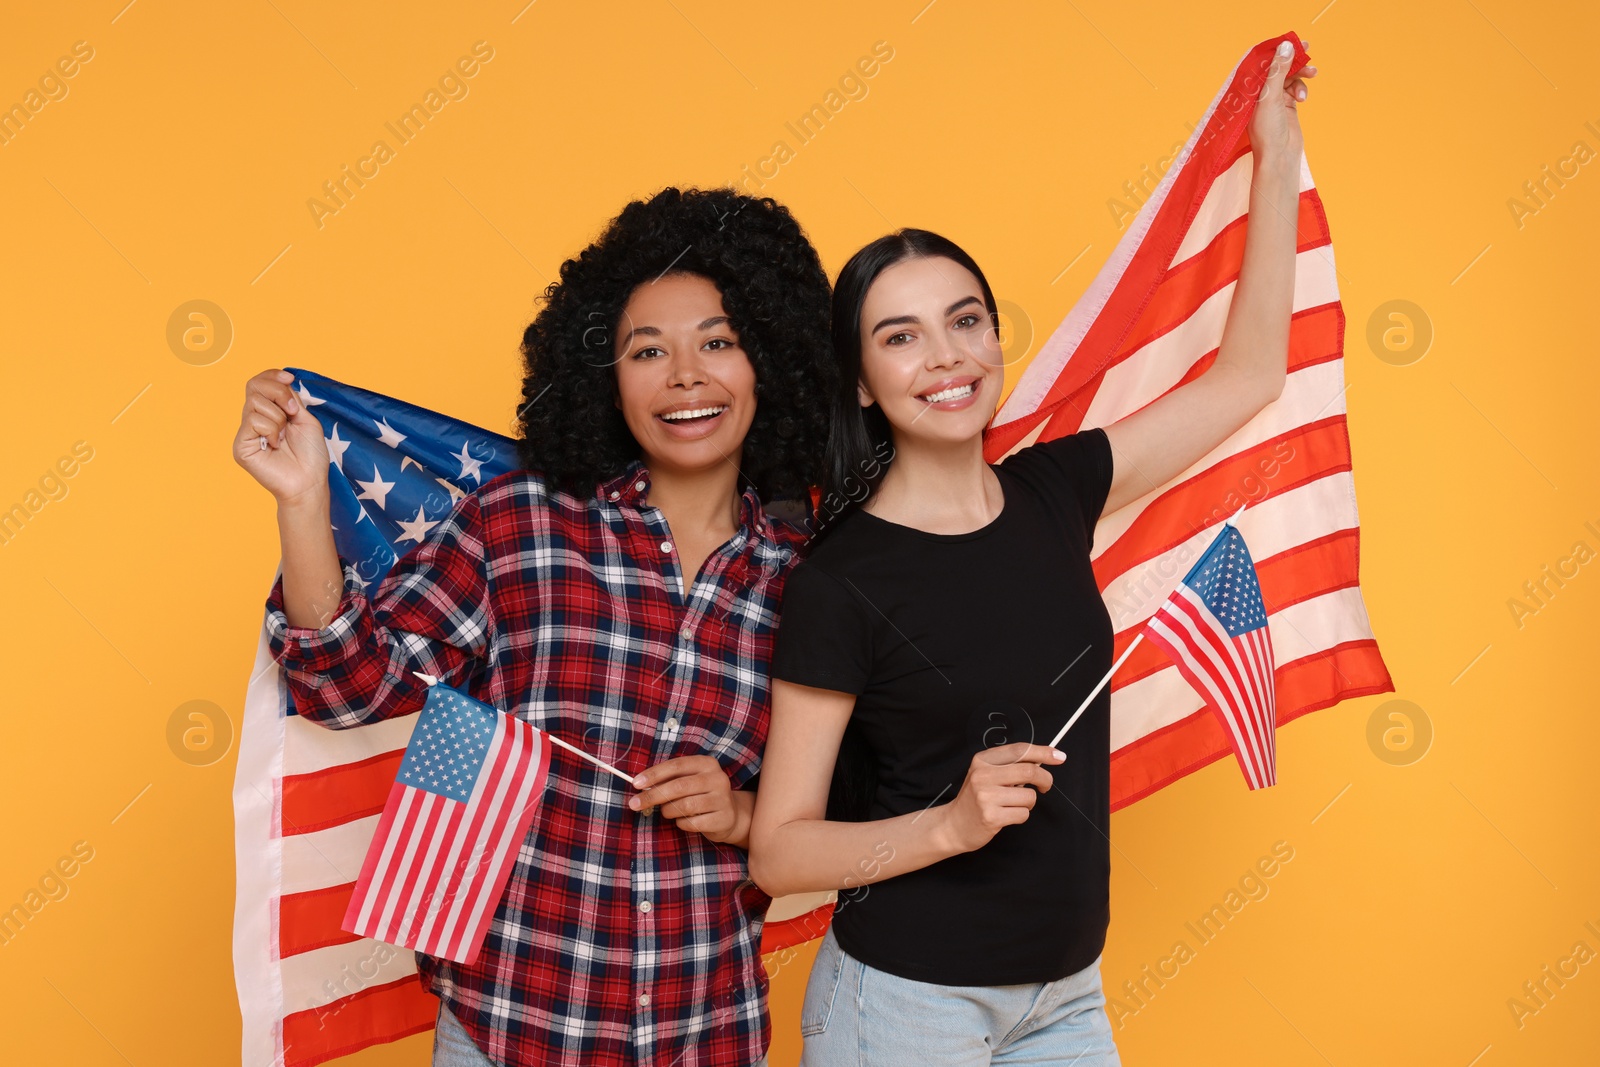 Photo of 4th of July - Independence Day of USA. Happy women with American flags on yellow background